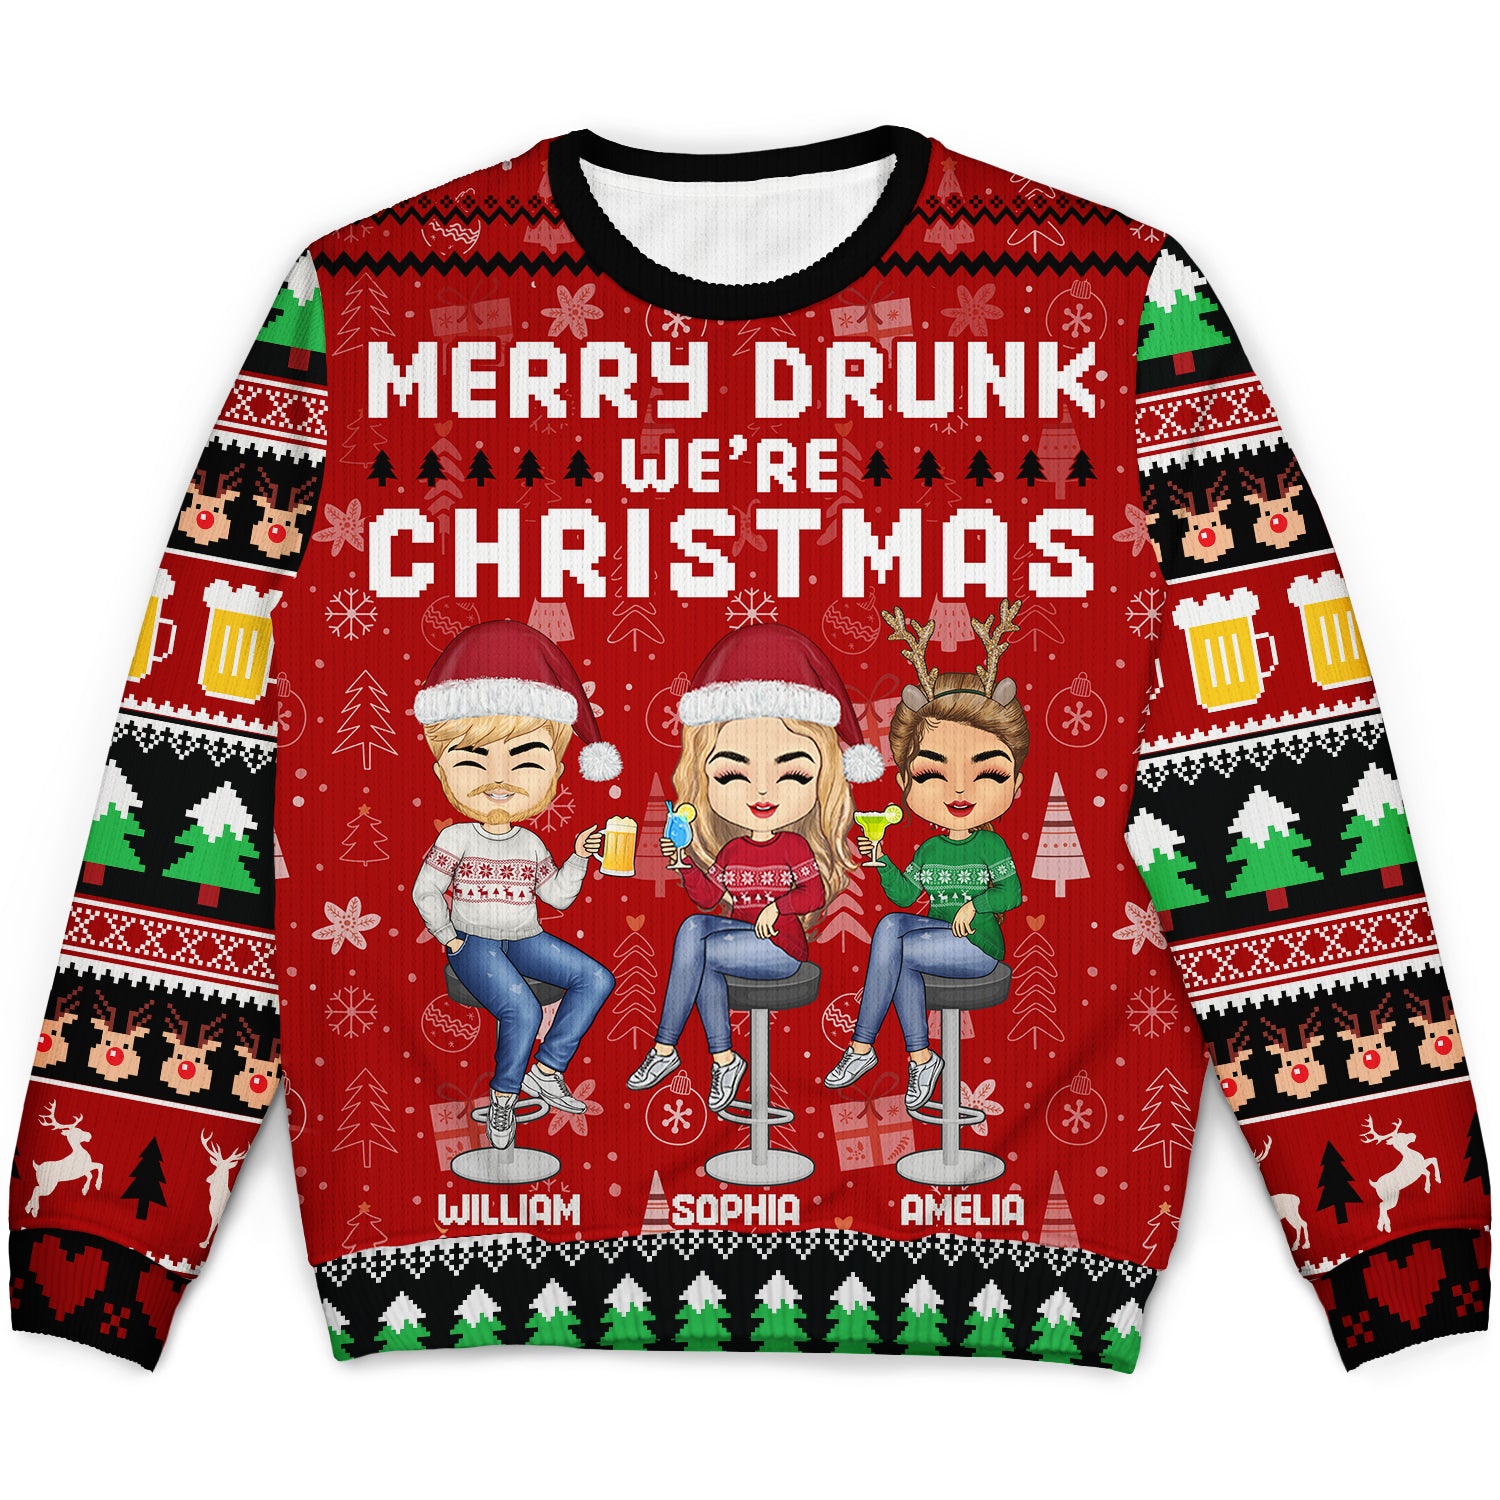 Merry Drunk We're Christmas - Christmas Gift For Bestie, Sibling, Colleague, Best Friend - Personalized Unisex Ugly Sweater